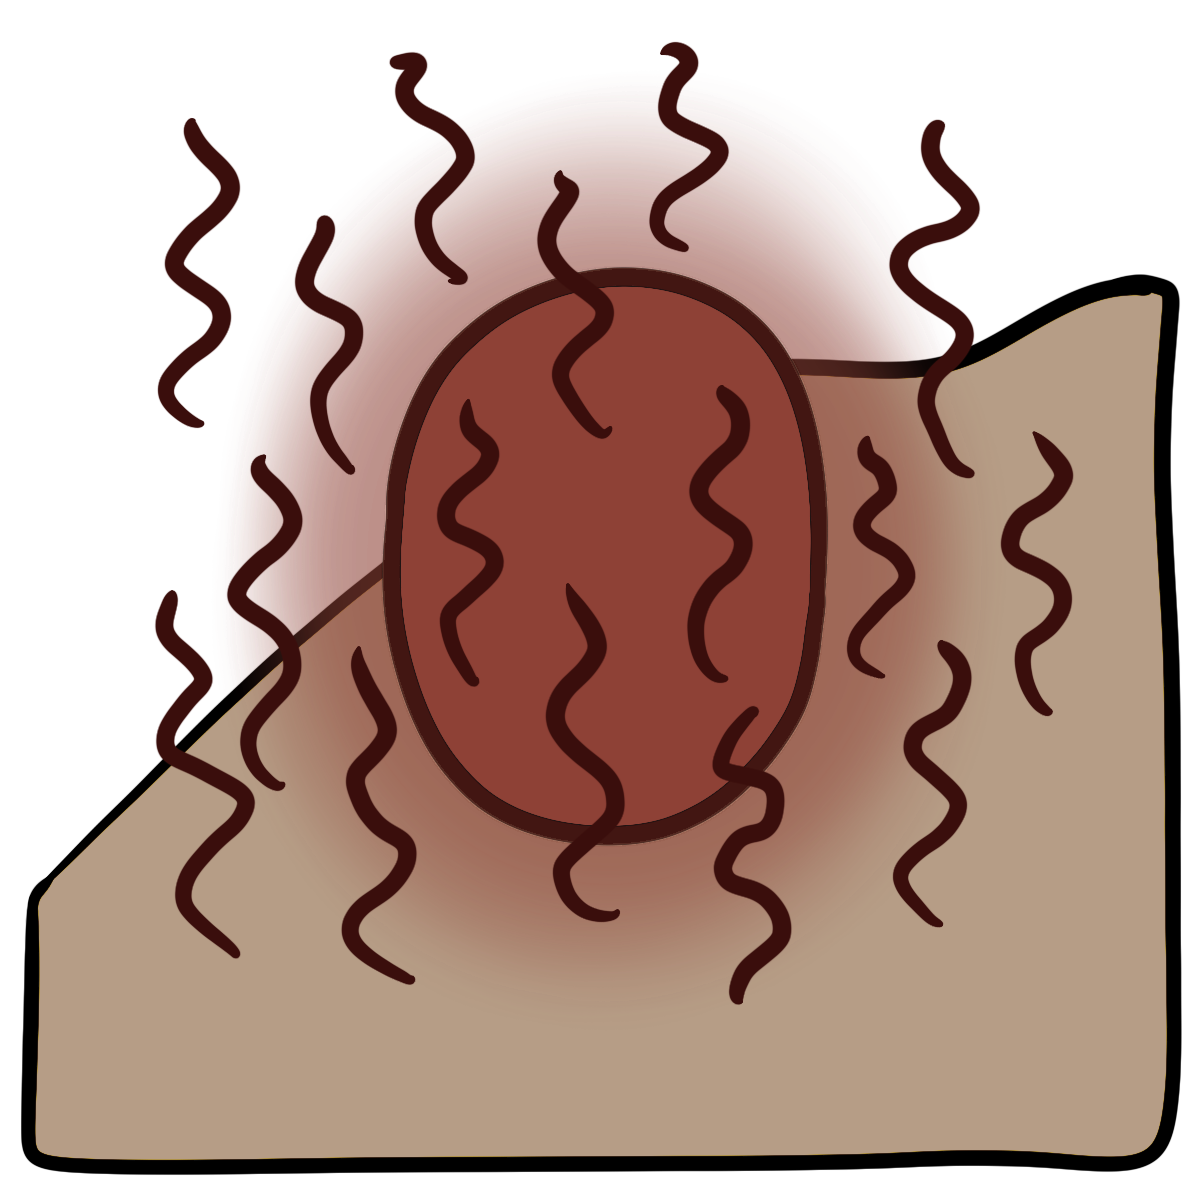 A red glowing oval with vertical squiggly dark red lines around it. Curved beige skin fills the bottom half of the background.